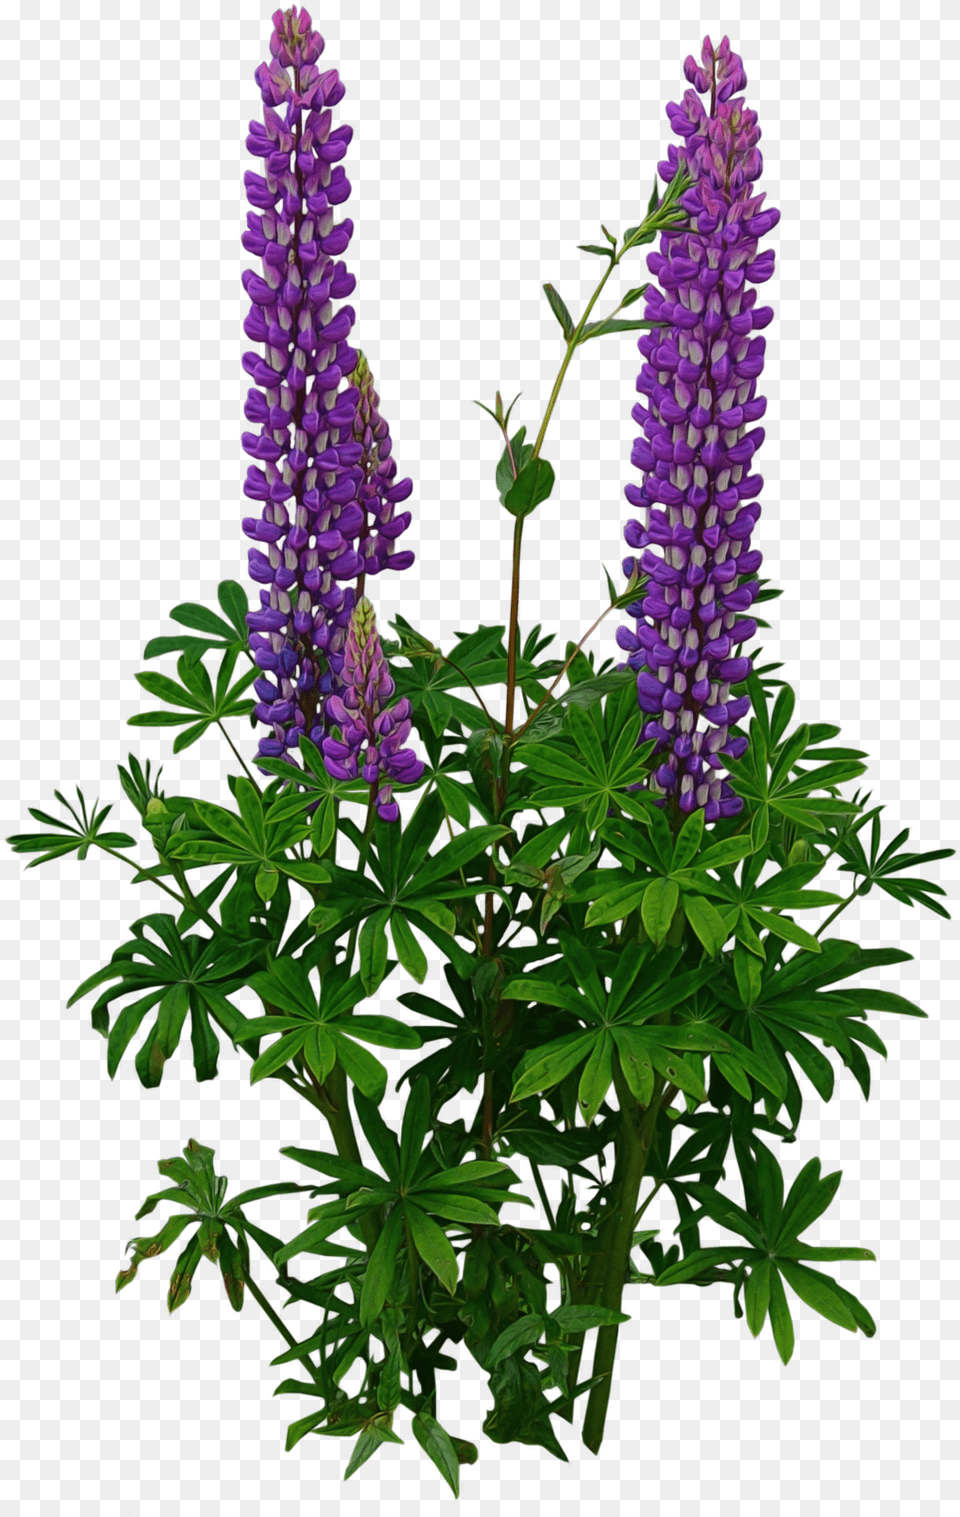 Tree Plan Tree Psd Photoshop Images Photoshop Lupine, Flower, Lupin, Plant, Geranium Free Png